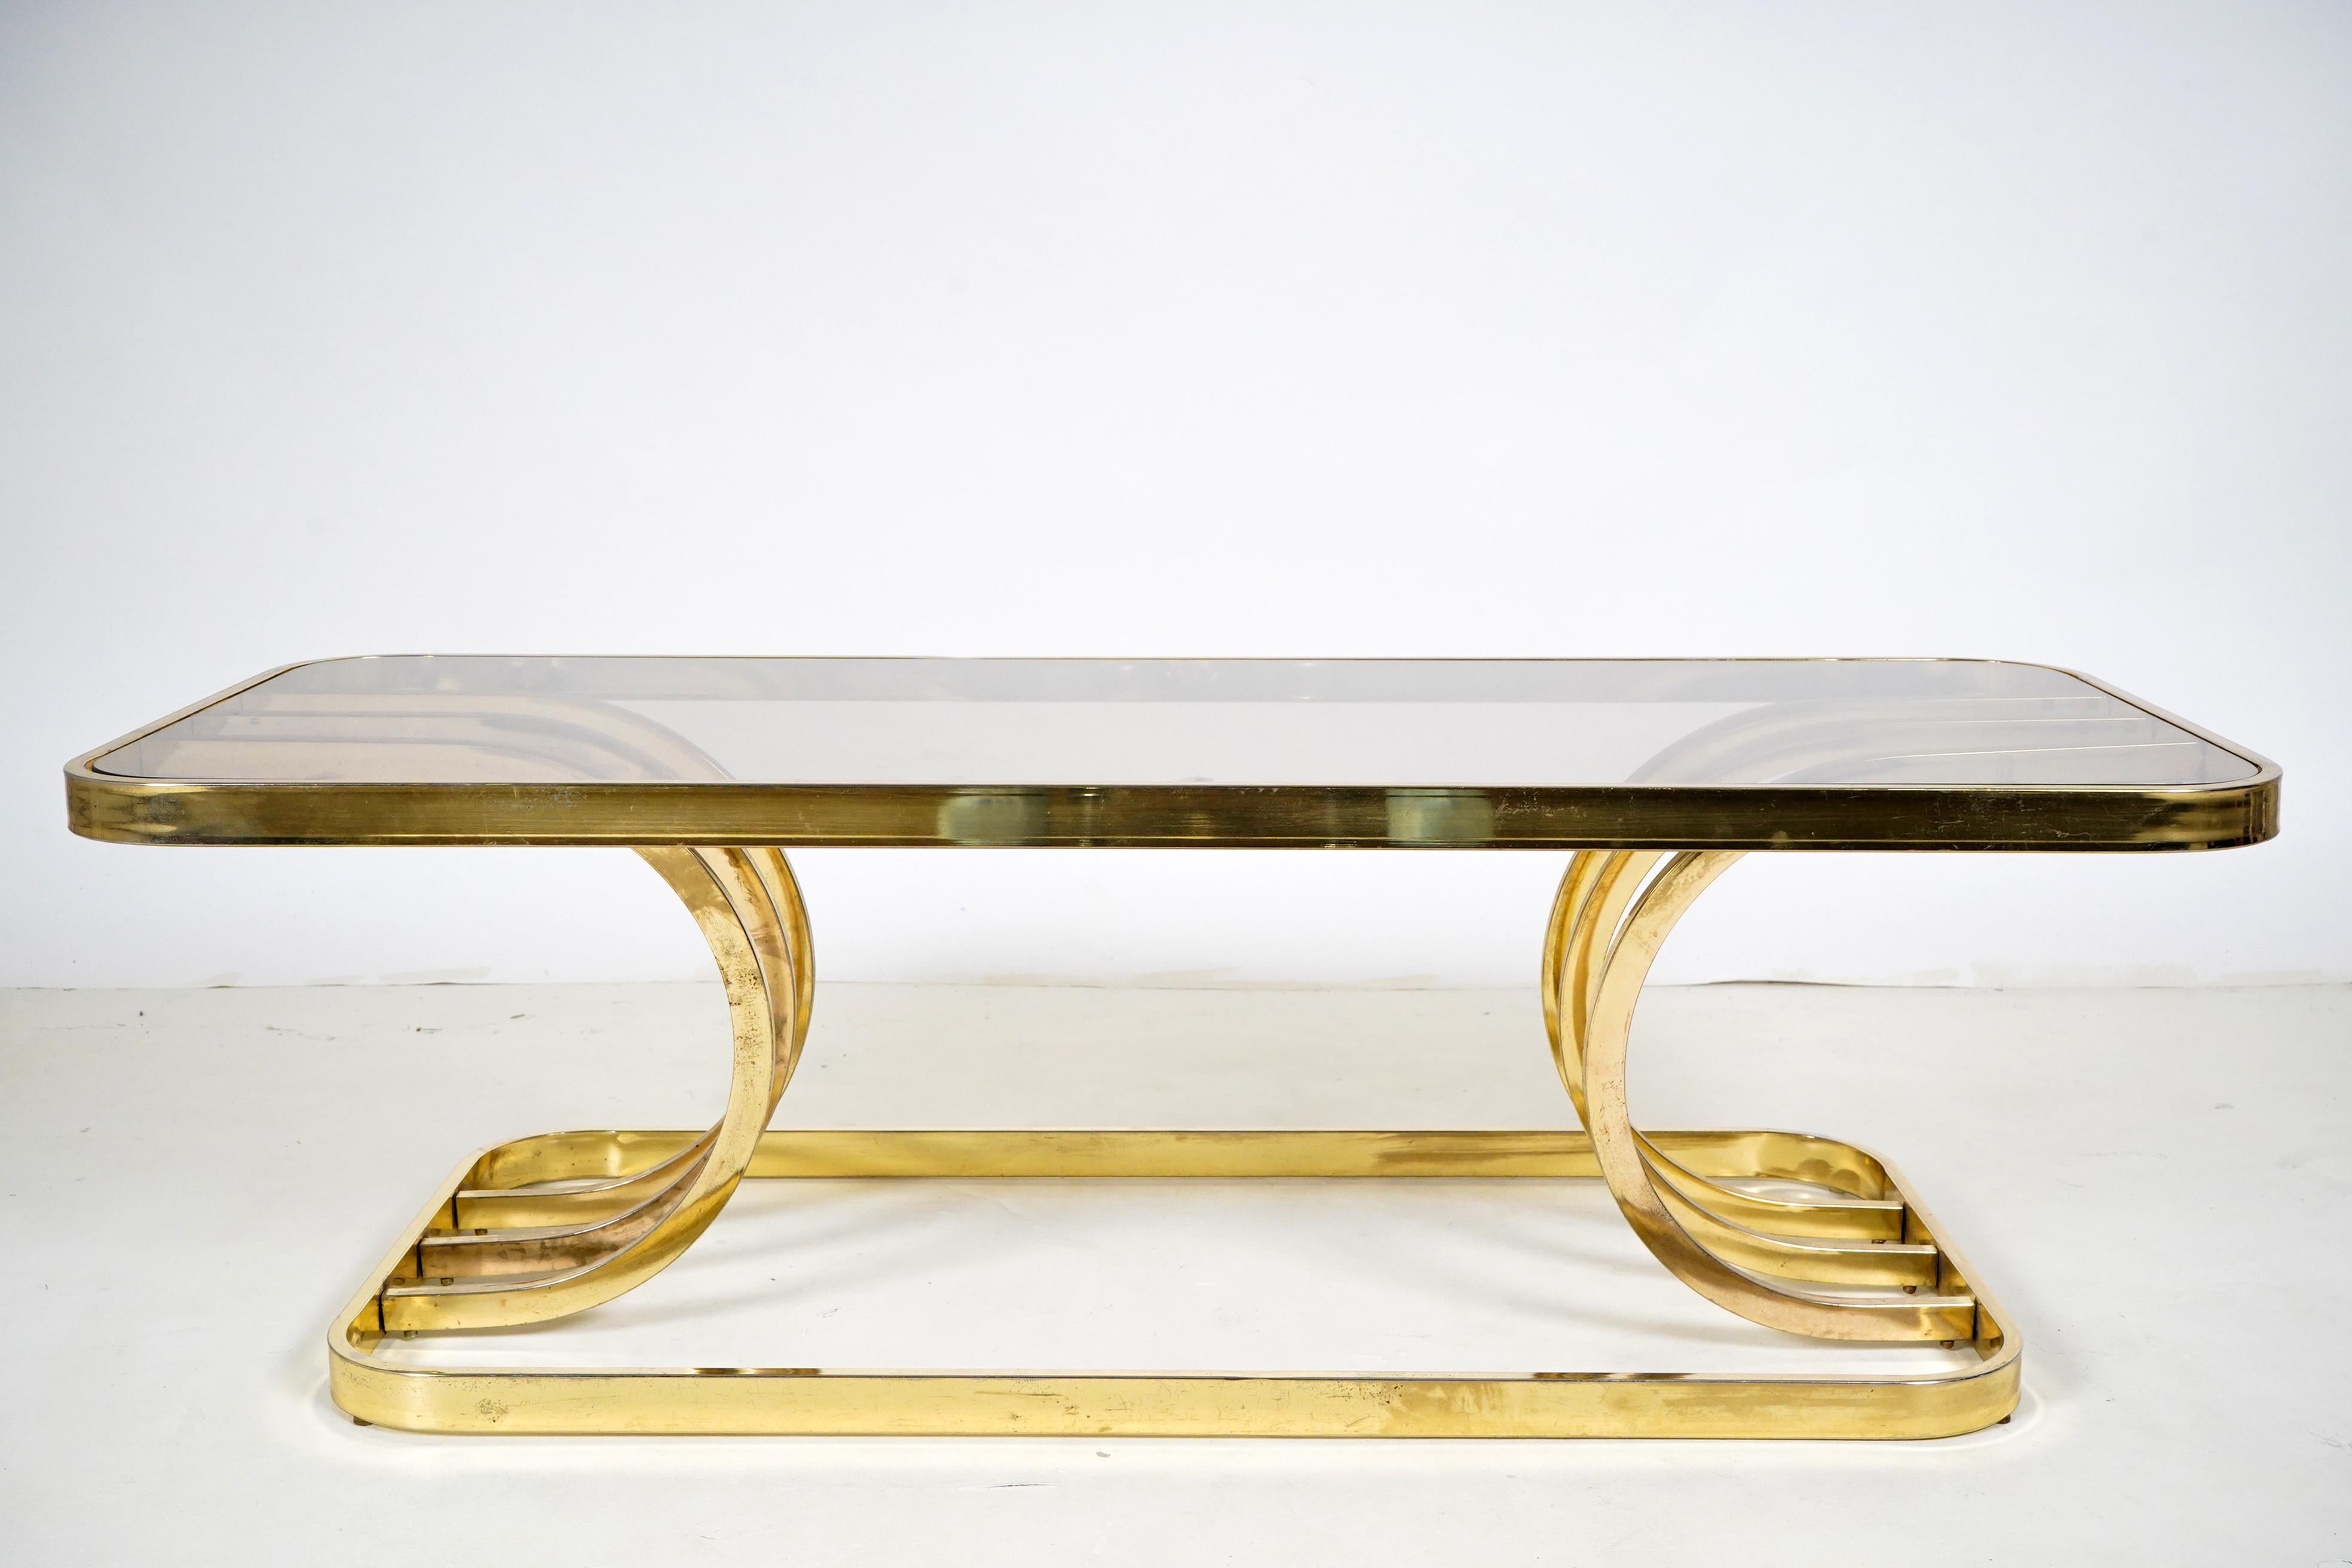 A brass-plated glass coffee table from the 1970s. During the interwar years Budapest was a hotspot of Art Deco furniture design and manufacturing. The Hungarian style was somewhat simpler than the French, combining traditional materials and